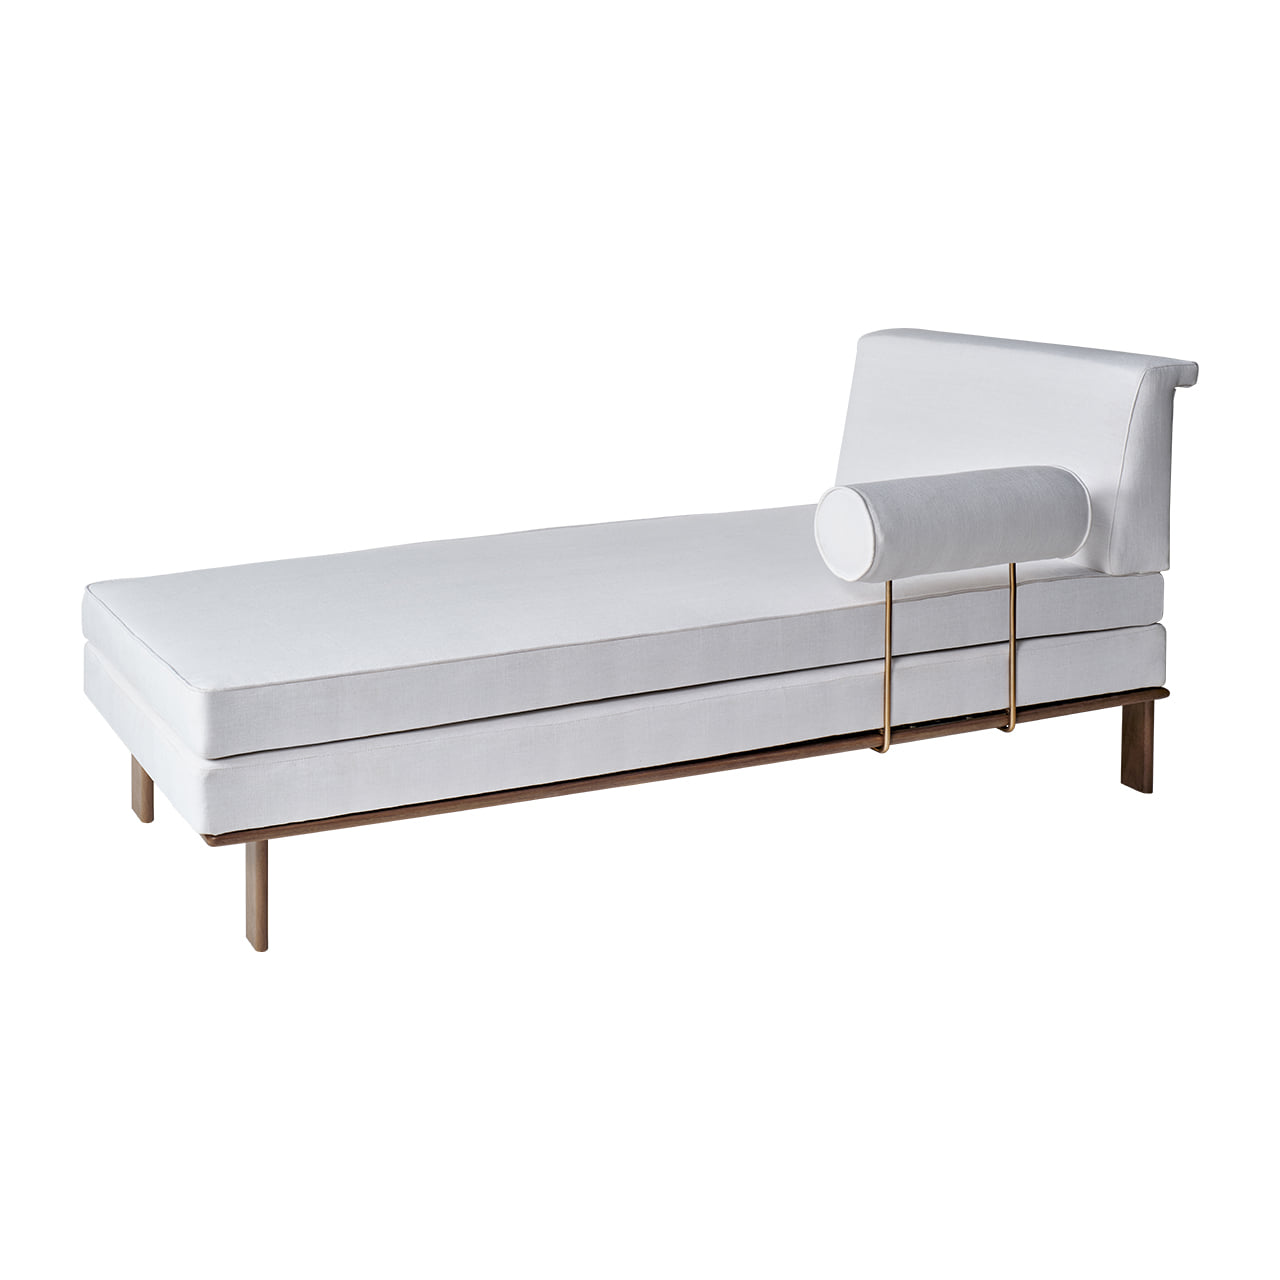 WA-TOP DAYBED